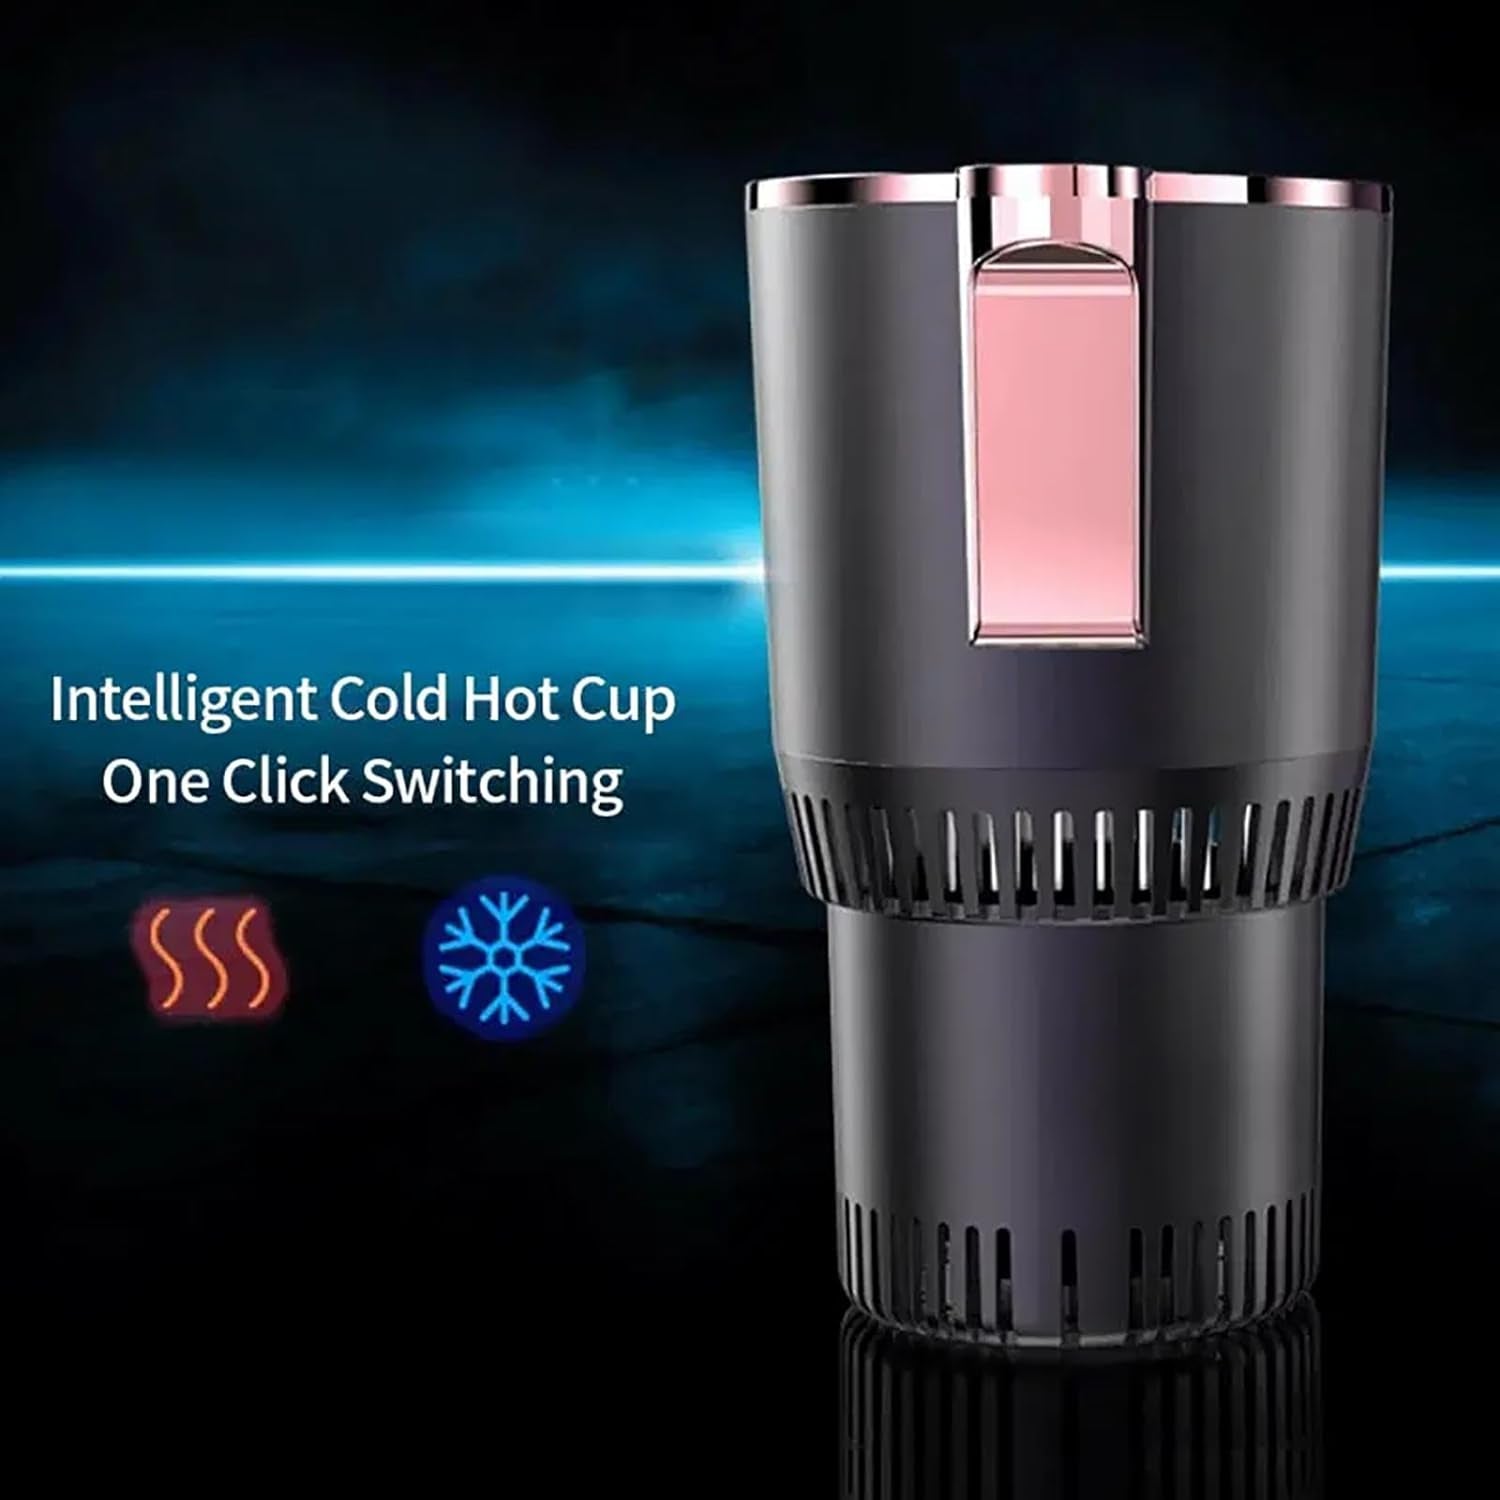 Roadmug - Heating and Cooling Car Cup Holder, Roadmug Can Heat or Cool Your Drink for Car, Theroadmug Electric Heat and Cold Cooler, Refrigeration and Heating Cup (Sapphire Blue)